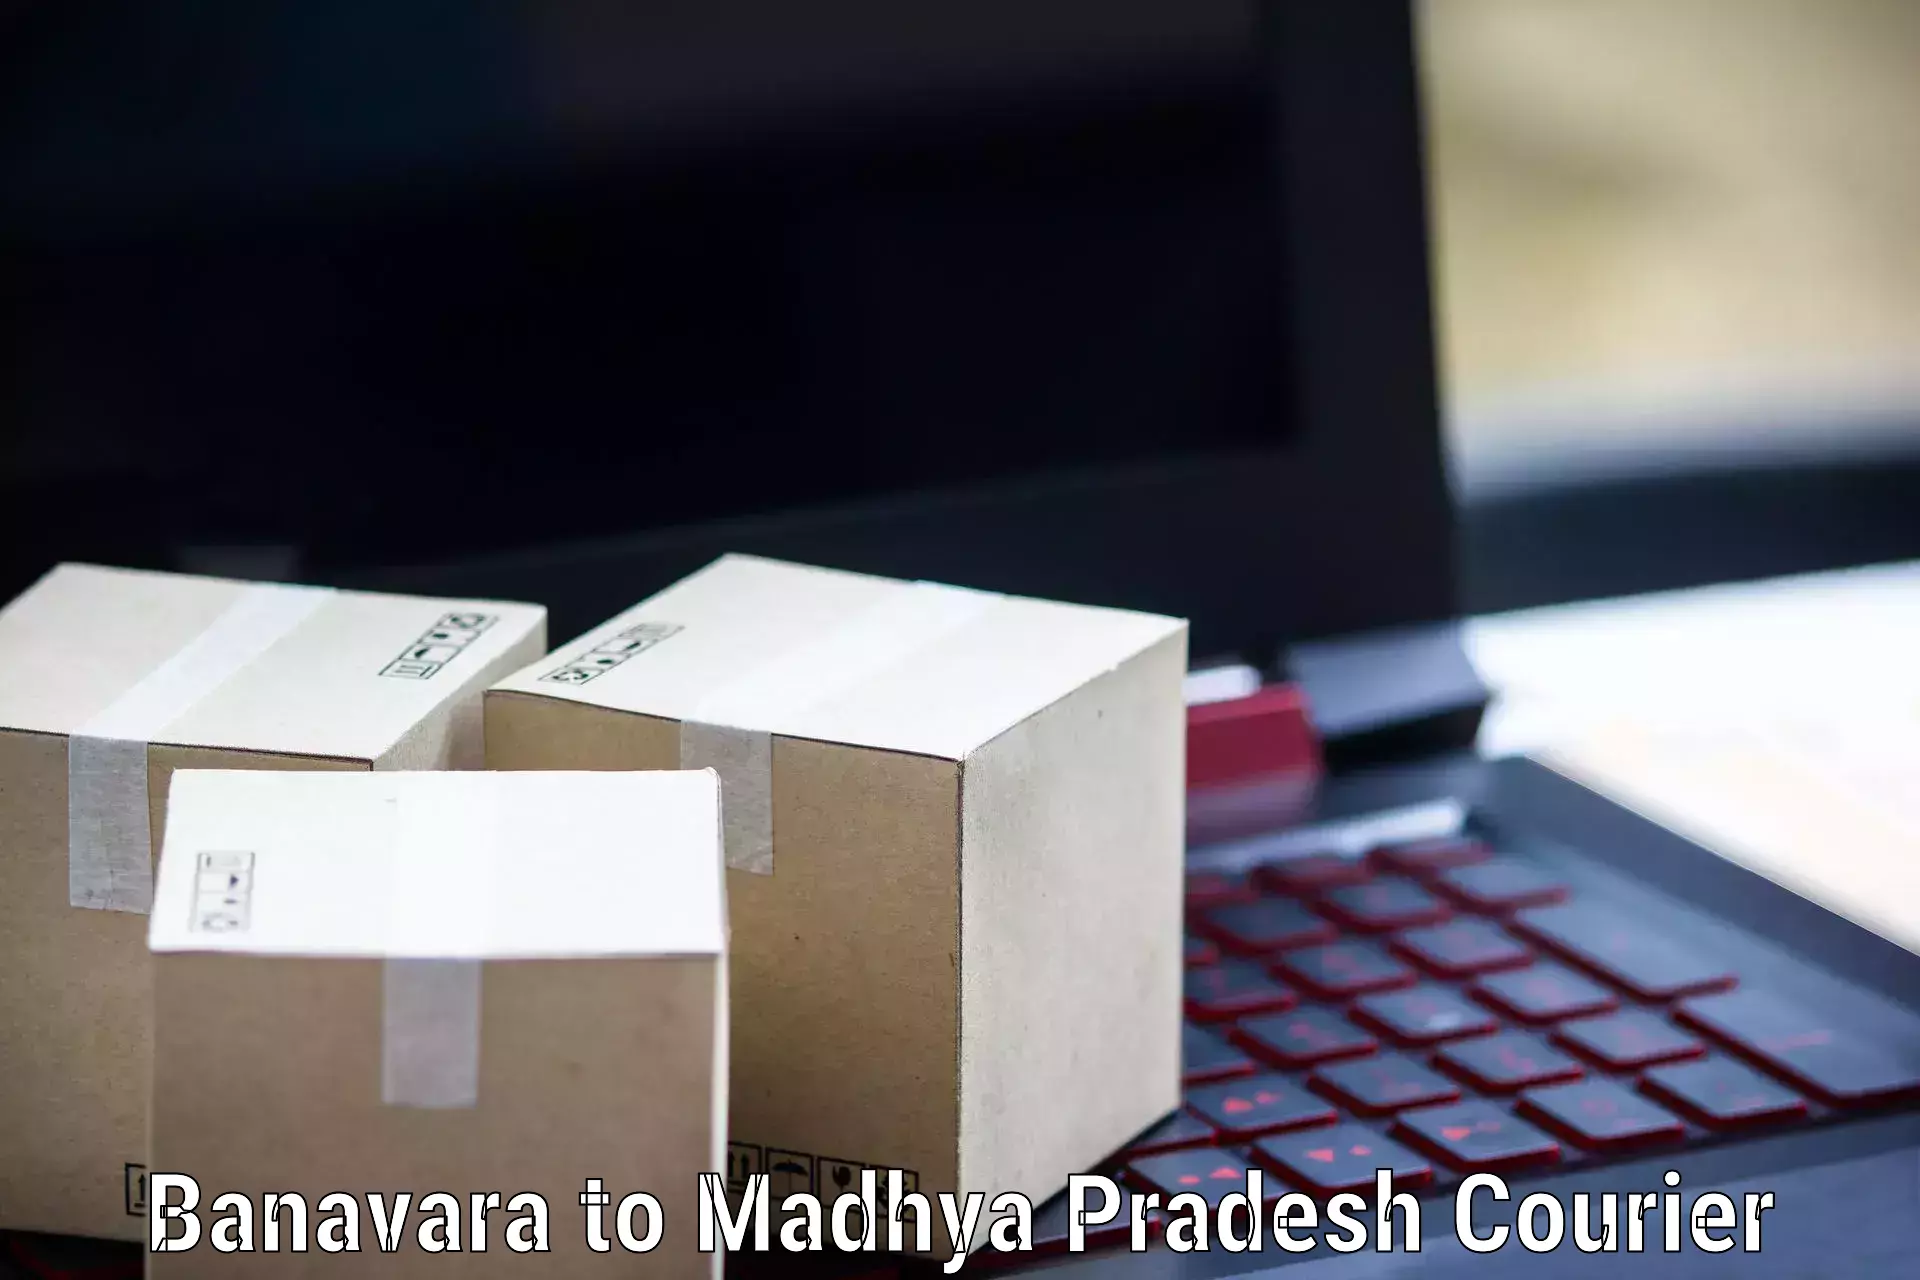 Easy access courier services in Banavara to Nalkheda